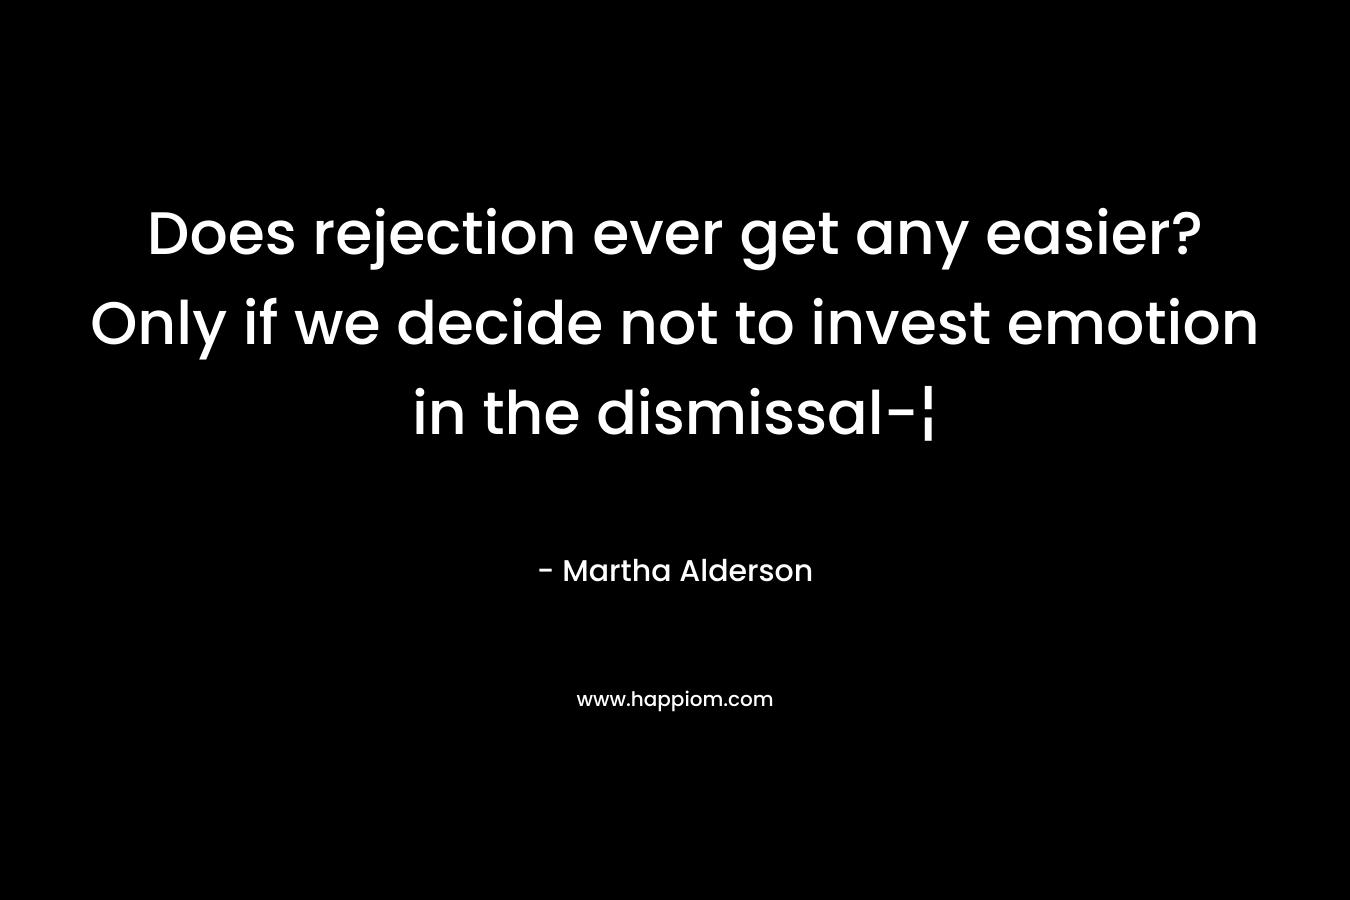 Does rejection ever get any easier? Only if we decide not to invest emotion in the dismissal-¦